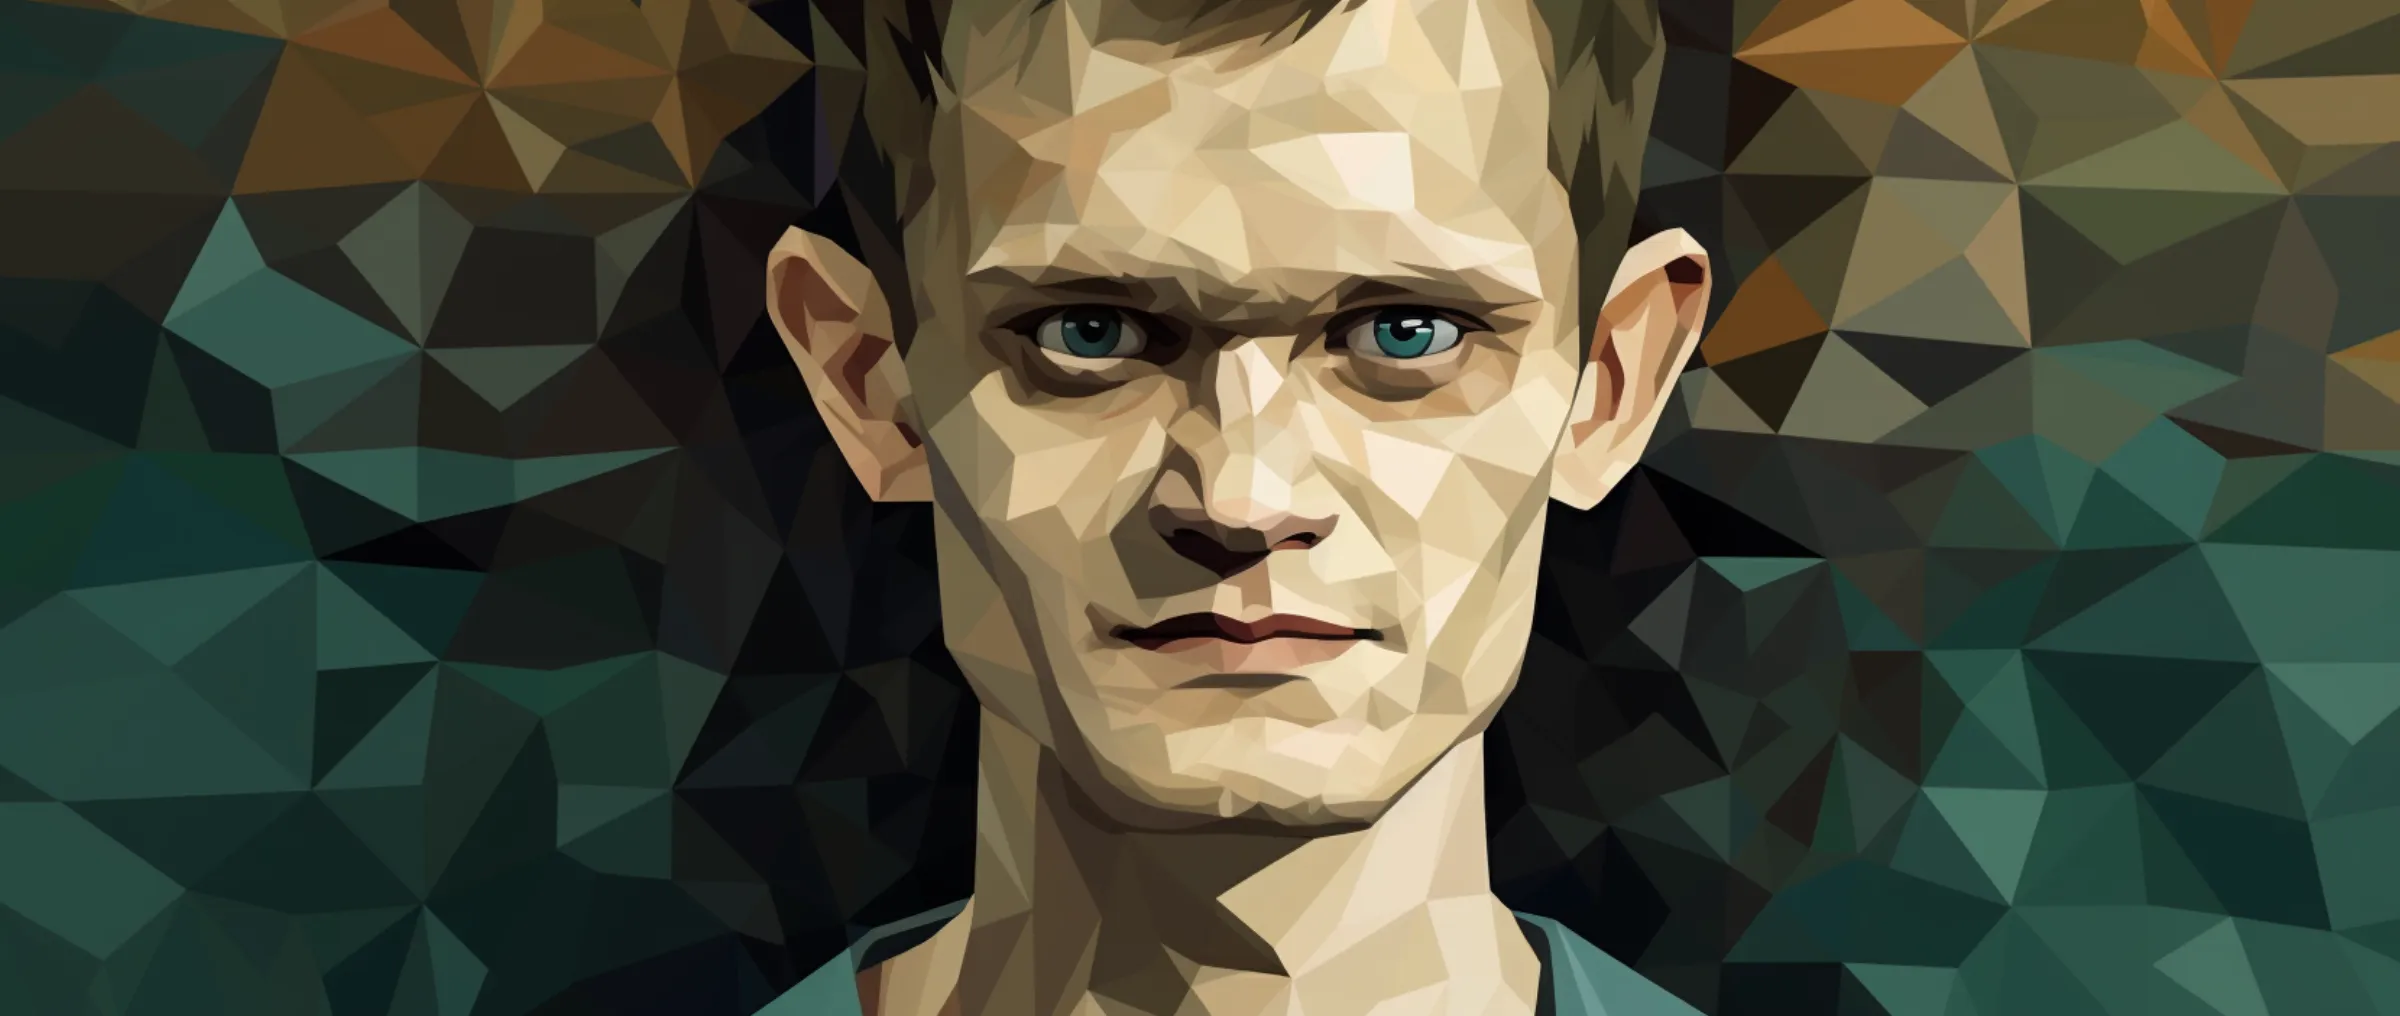 Vitalik Buterin proposed three ways to simplify the design of Proof-of-Stake Ethereum